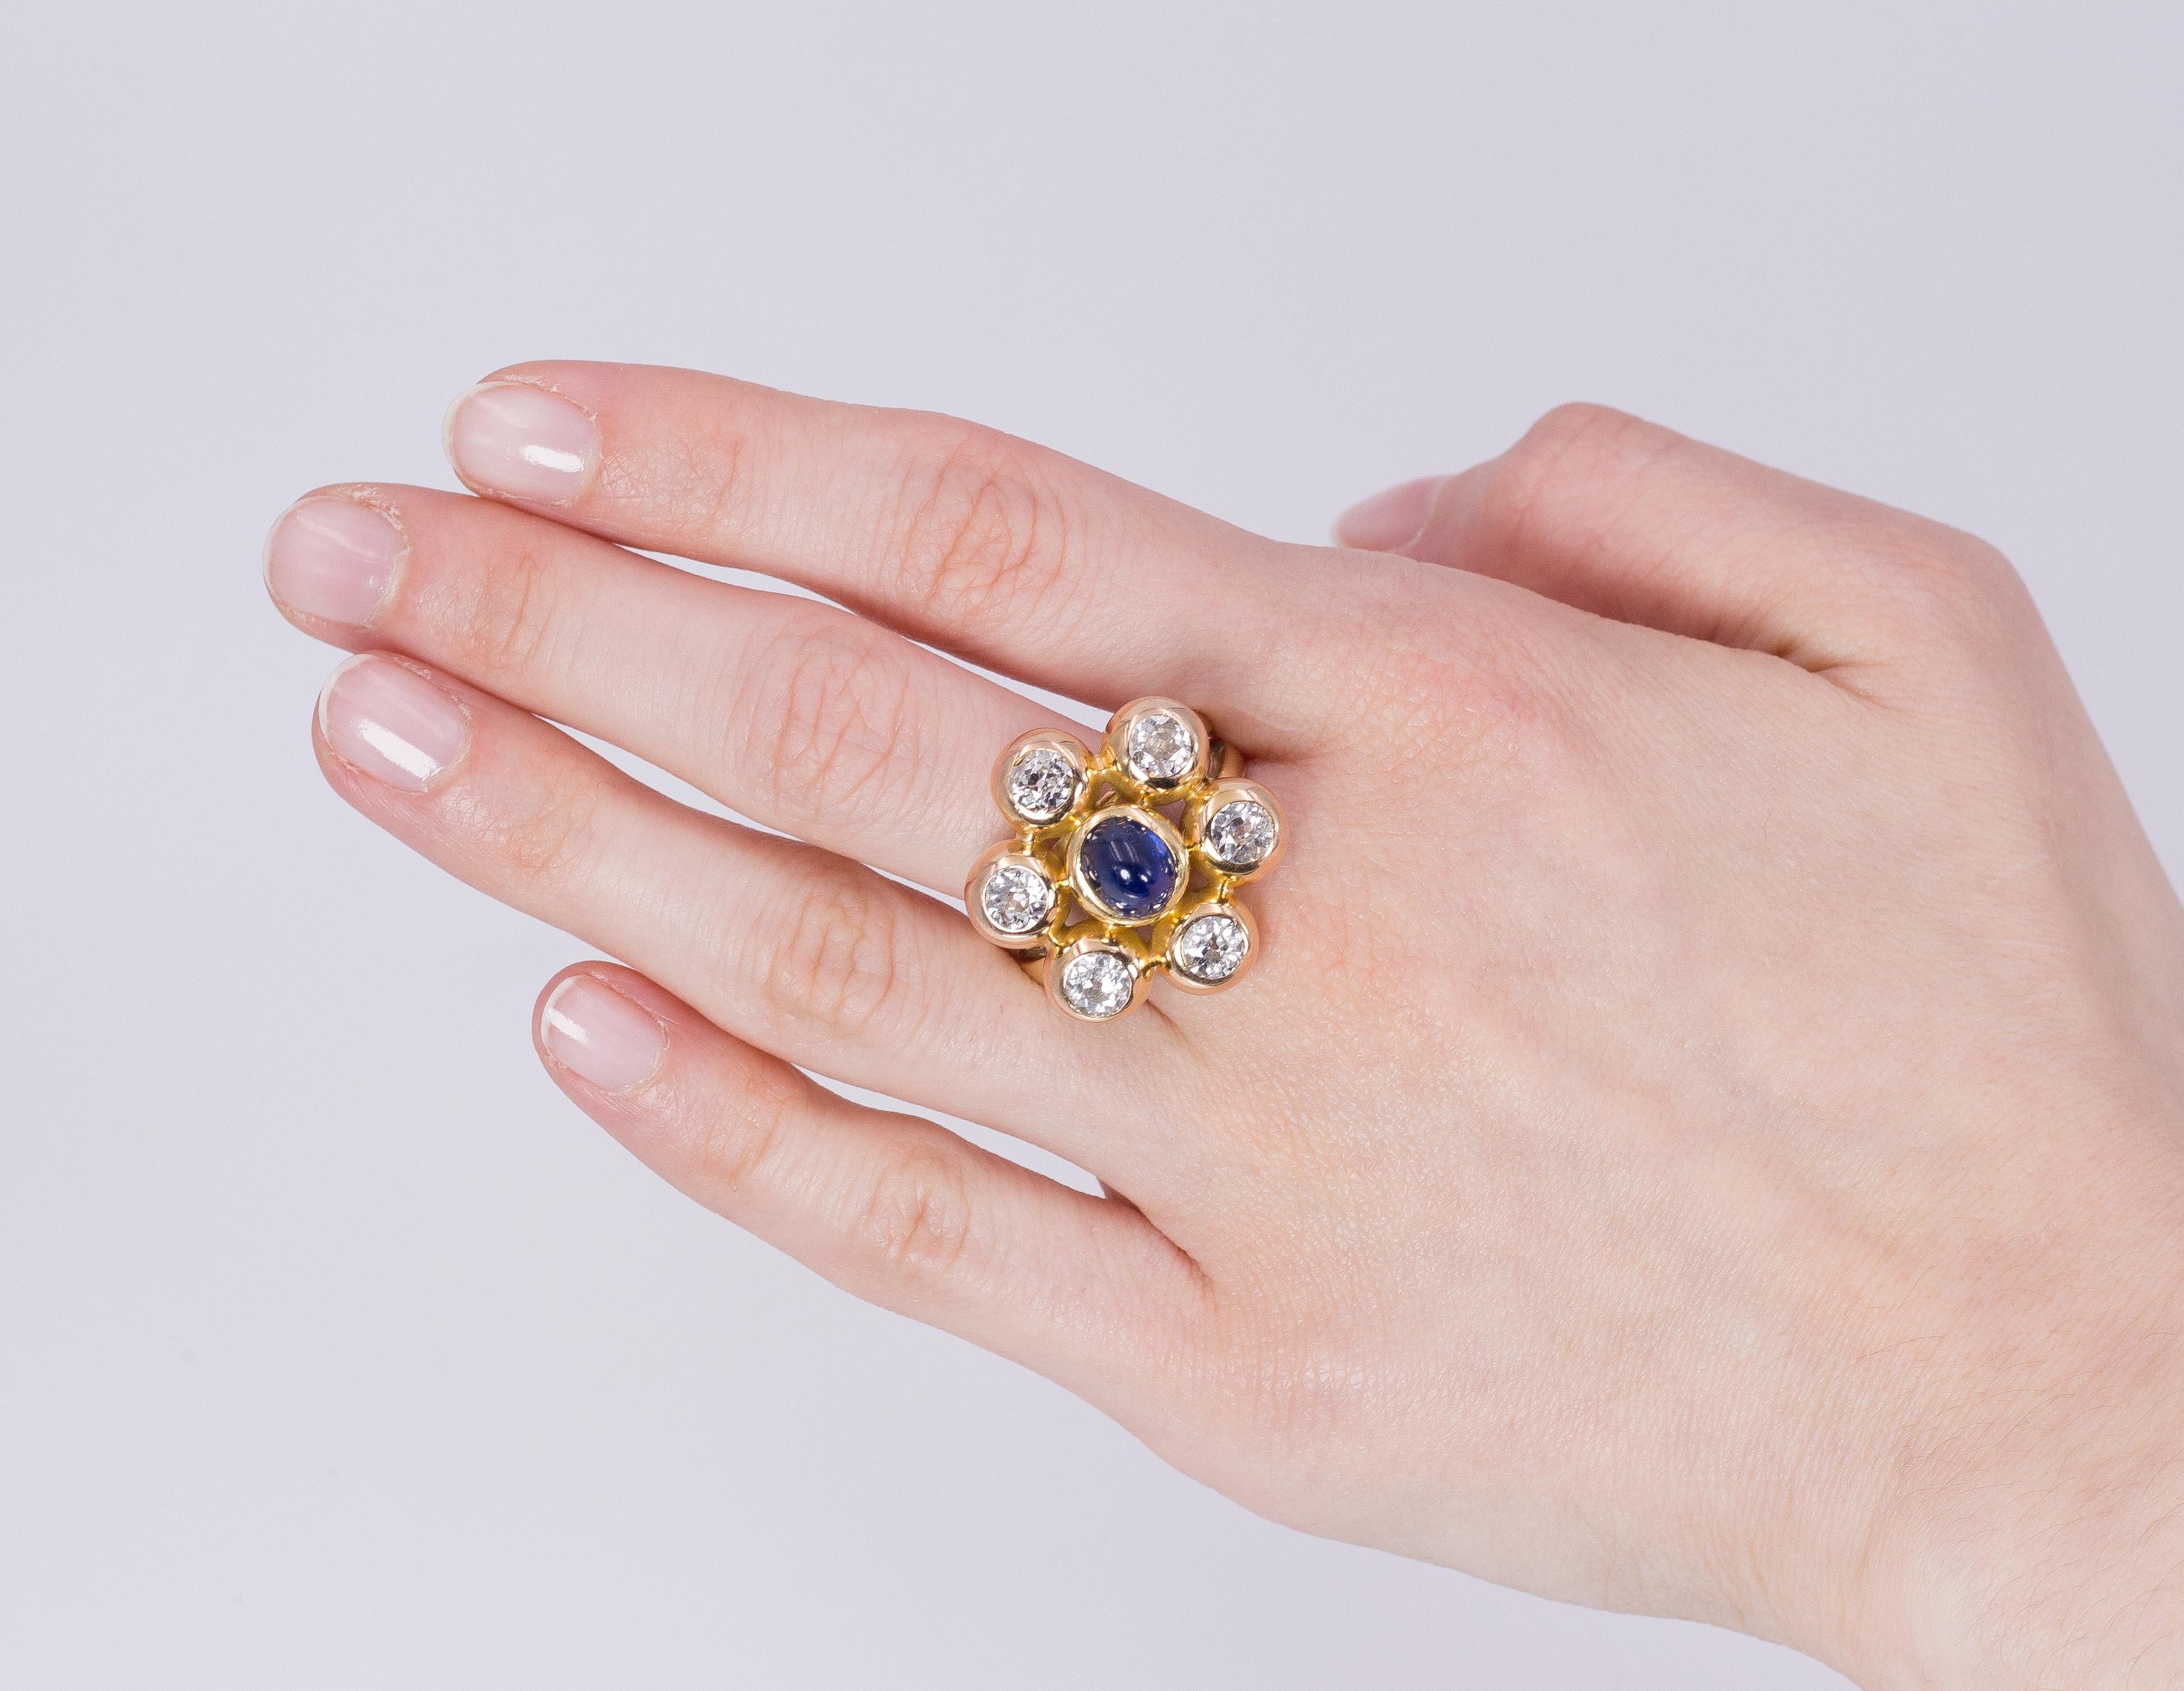 Women's Vintage 18 Karat Gold, Sapphire and Diamond Ring, 1980s For Sale